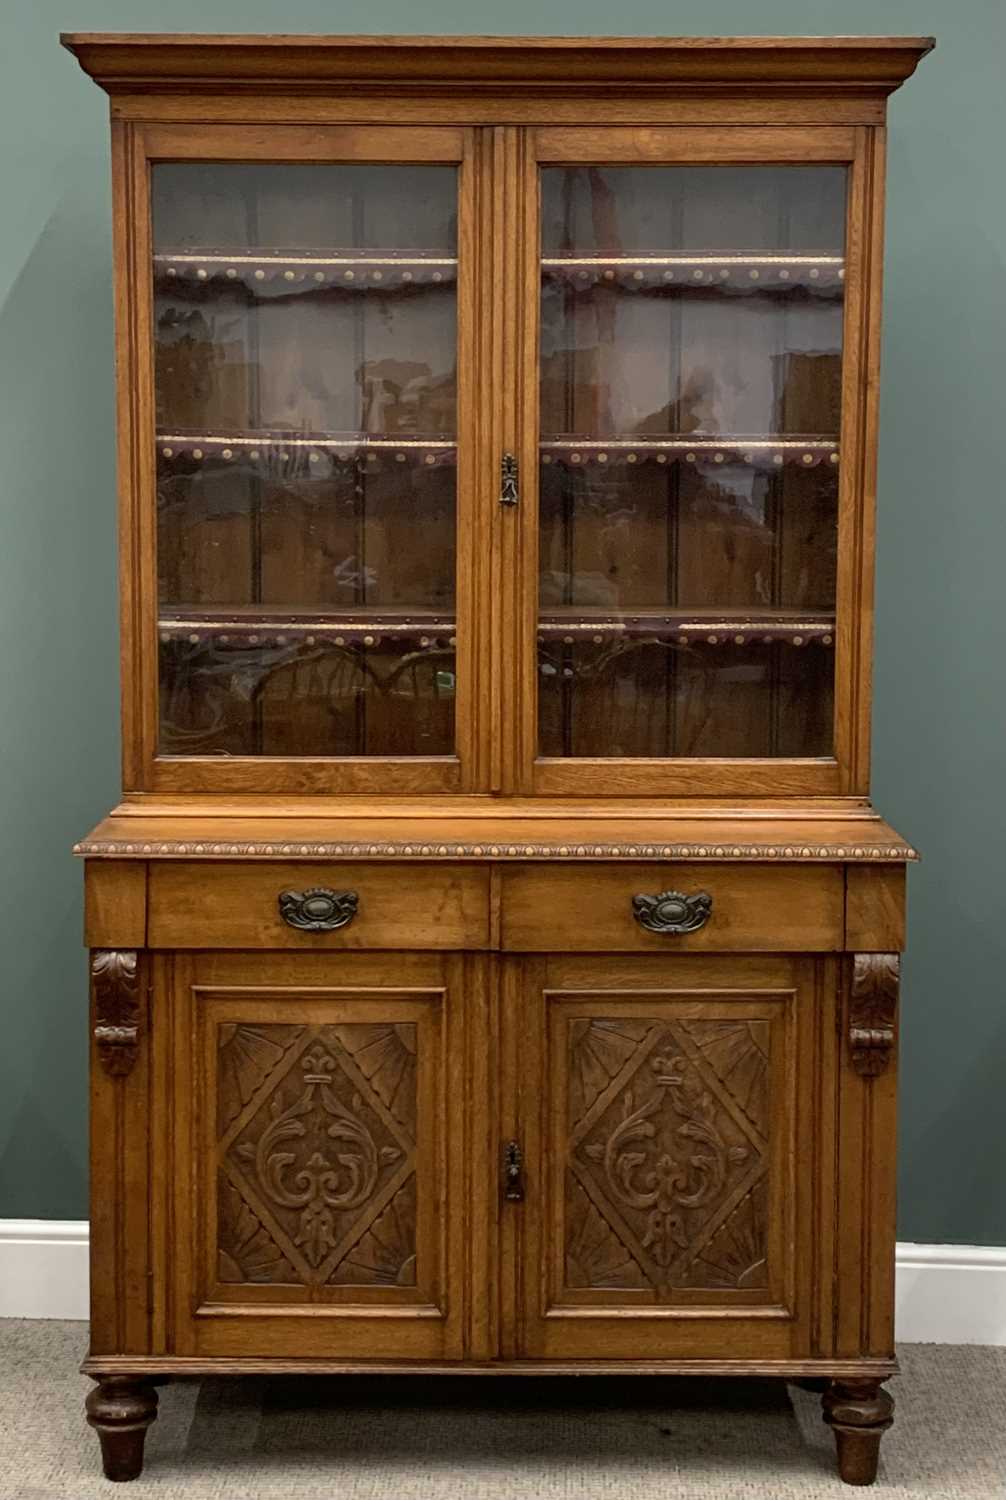 ANTIQUE OAK BOOKCASE CUPBOARD being nicely detailed with carved panels, carved edges, carved - Image 2 of 6